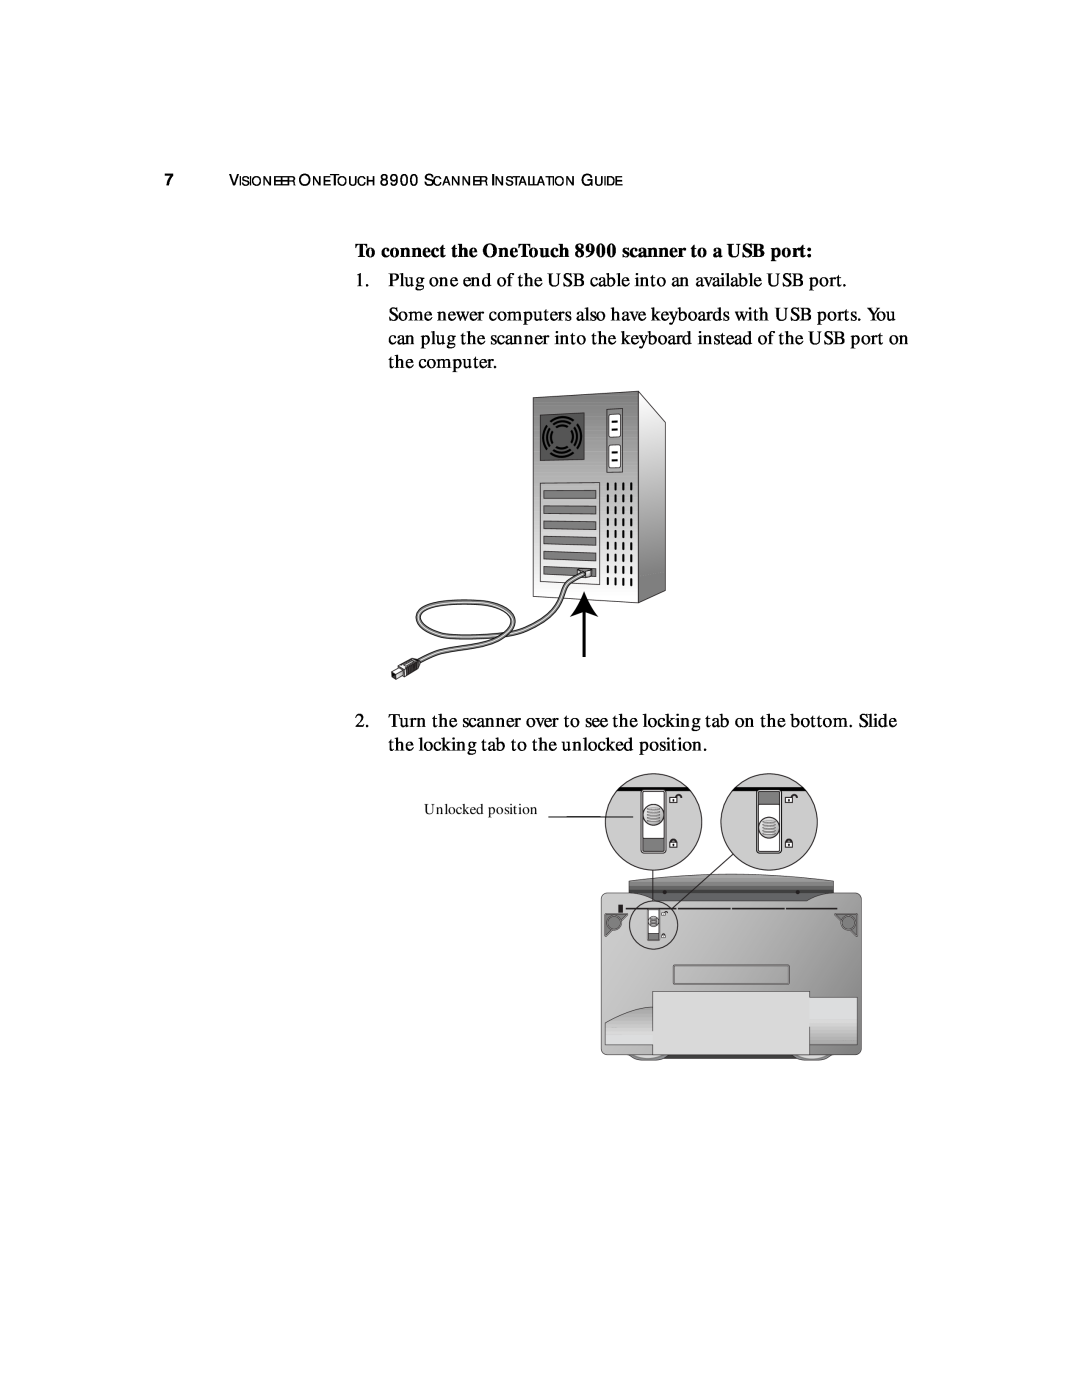 Visioneer manual To connect the OneTouch 8900 scanner to a USB port 